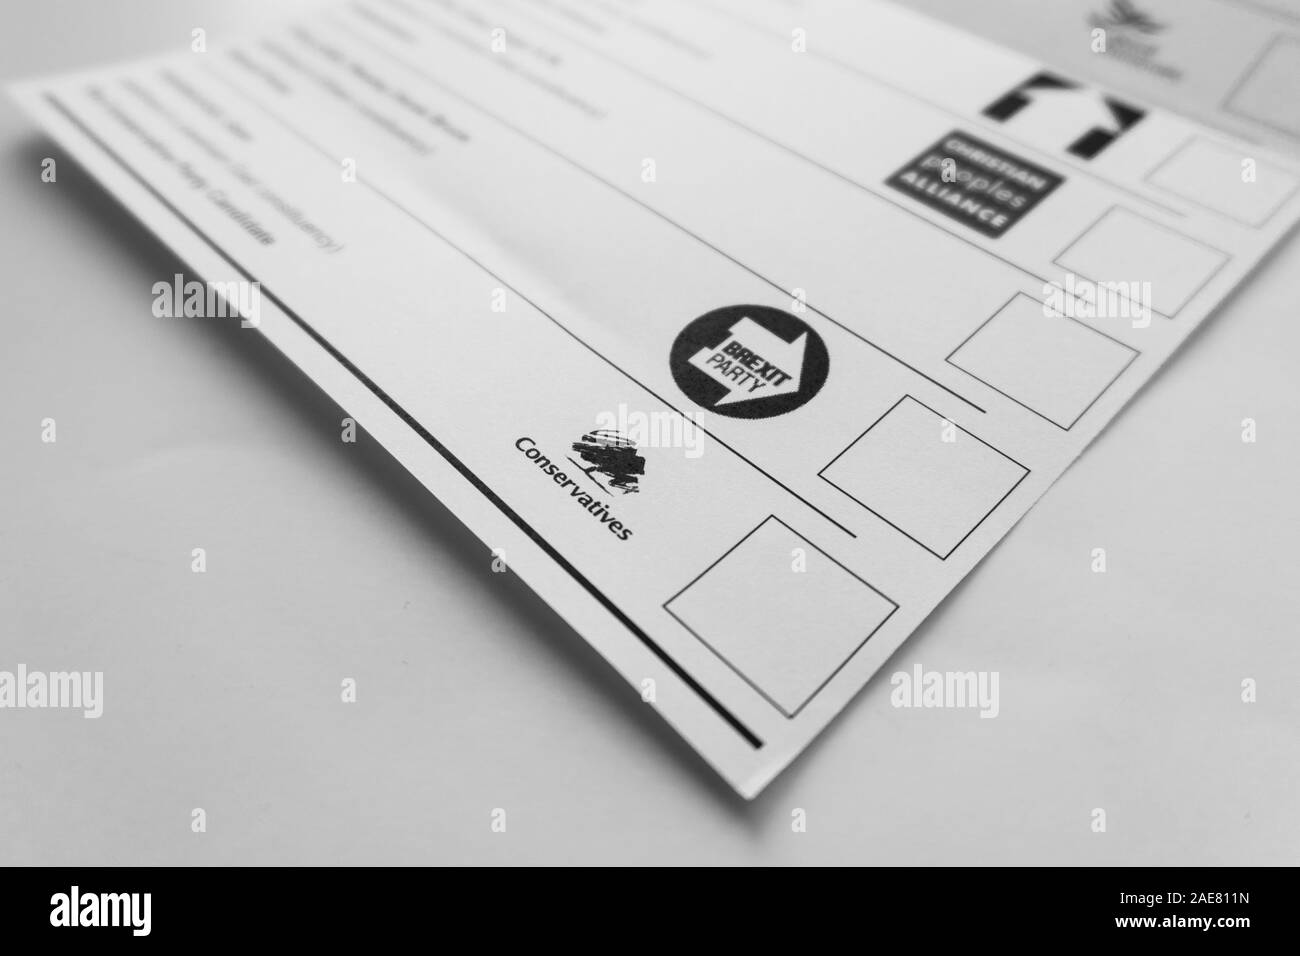 London / United Kingdom - December 7th 2019: Brexit party and Conservatives party logos on the ballot paper for general elections Stock Photo